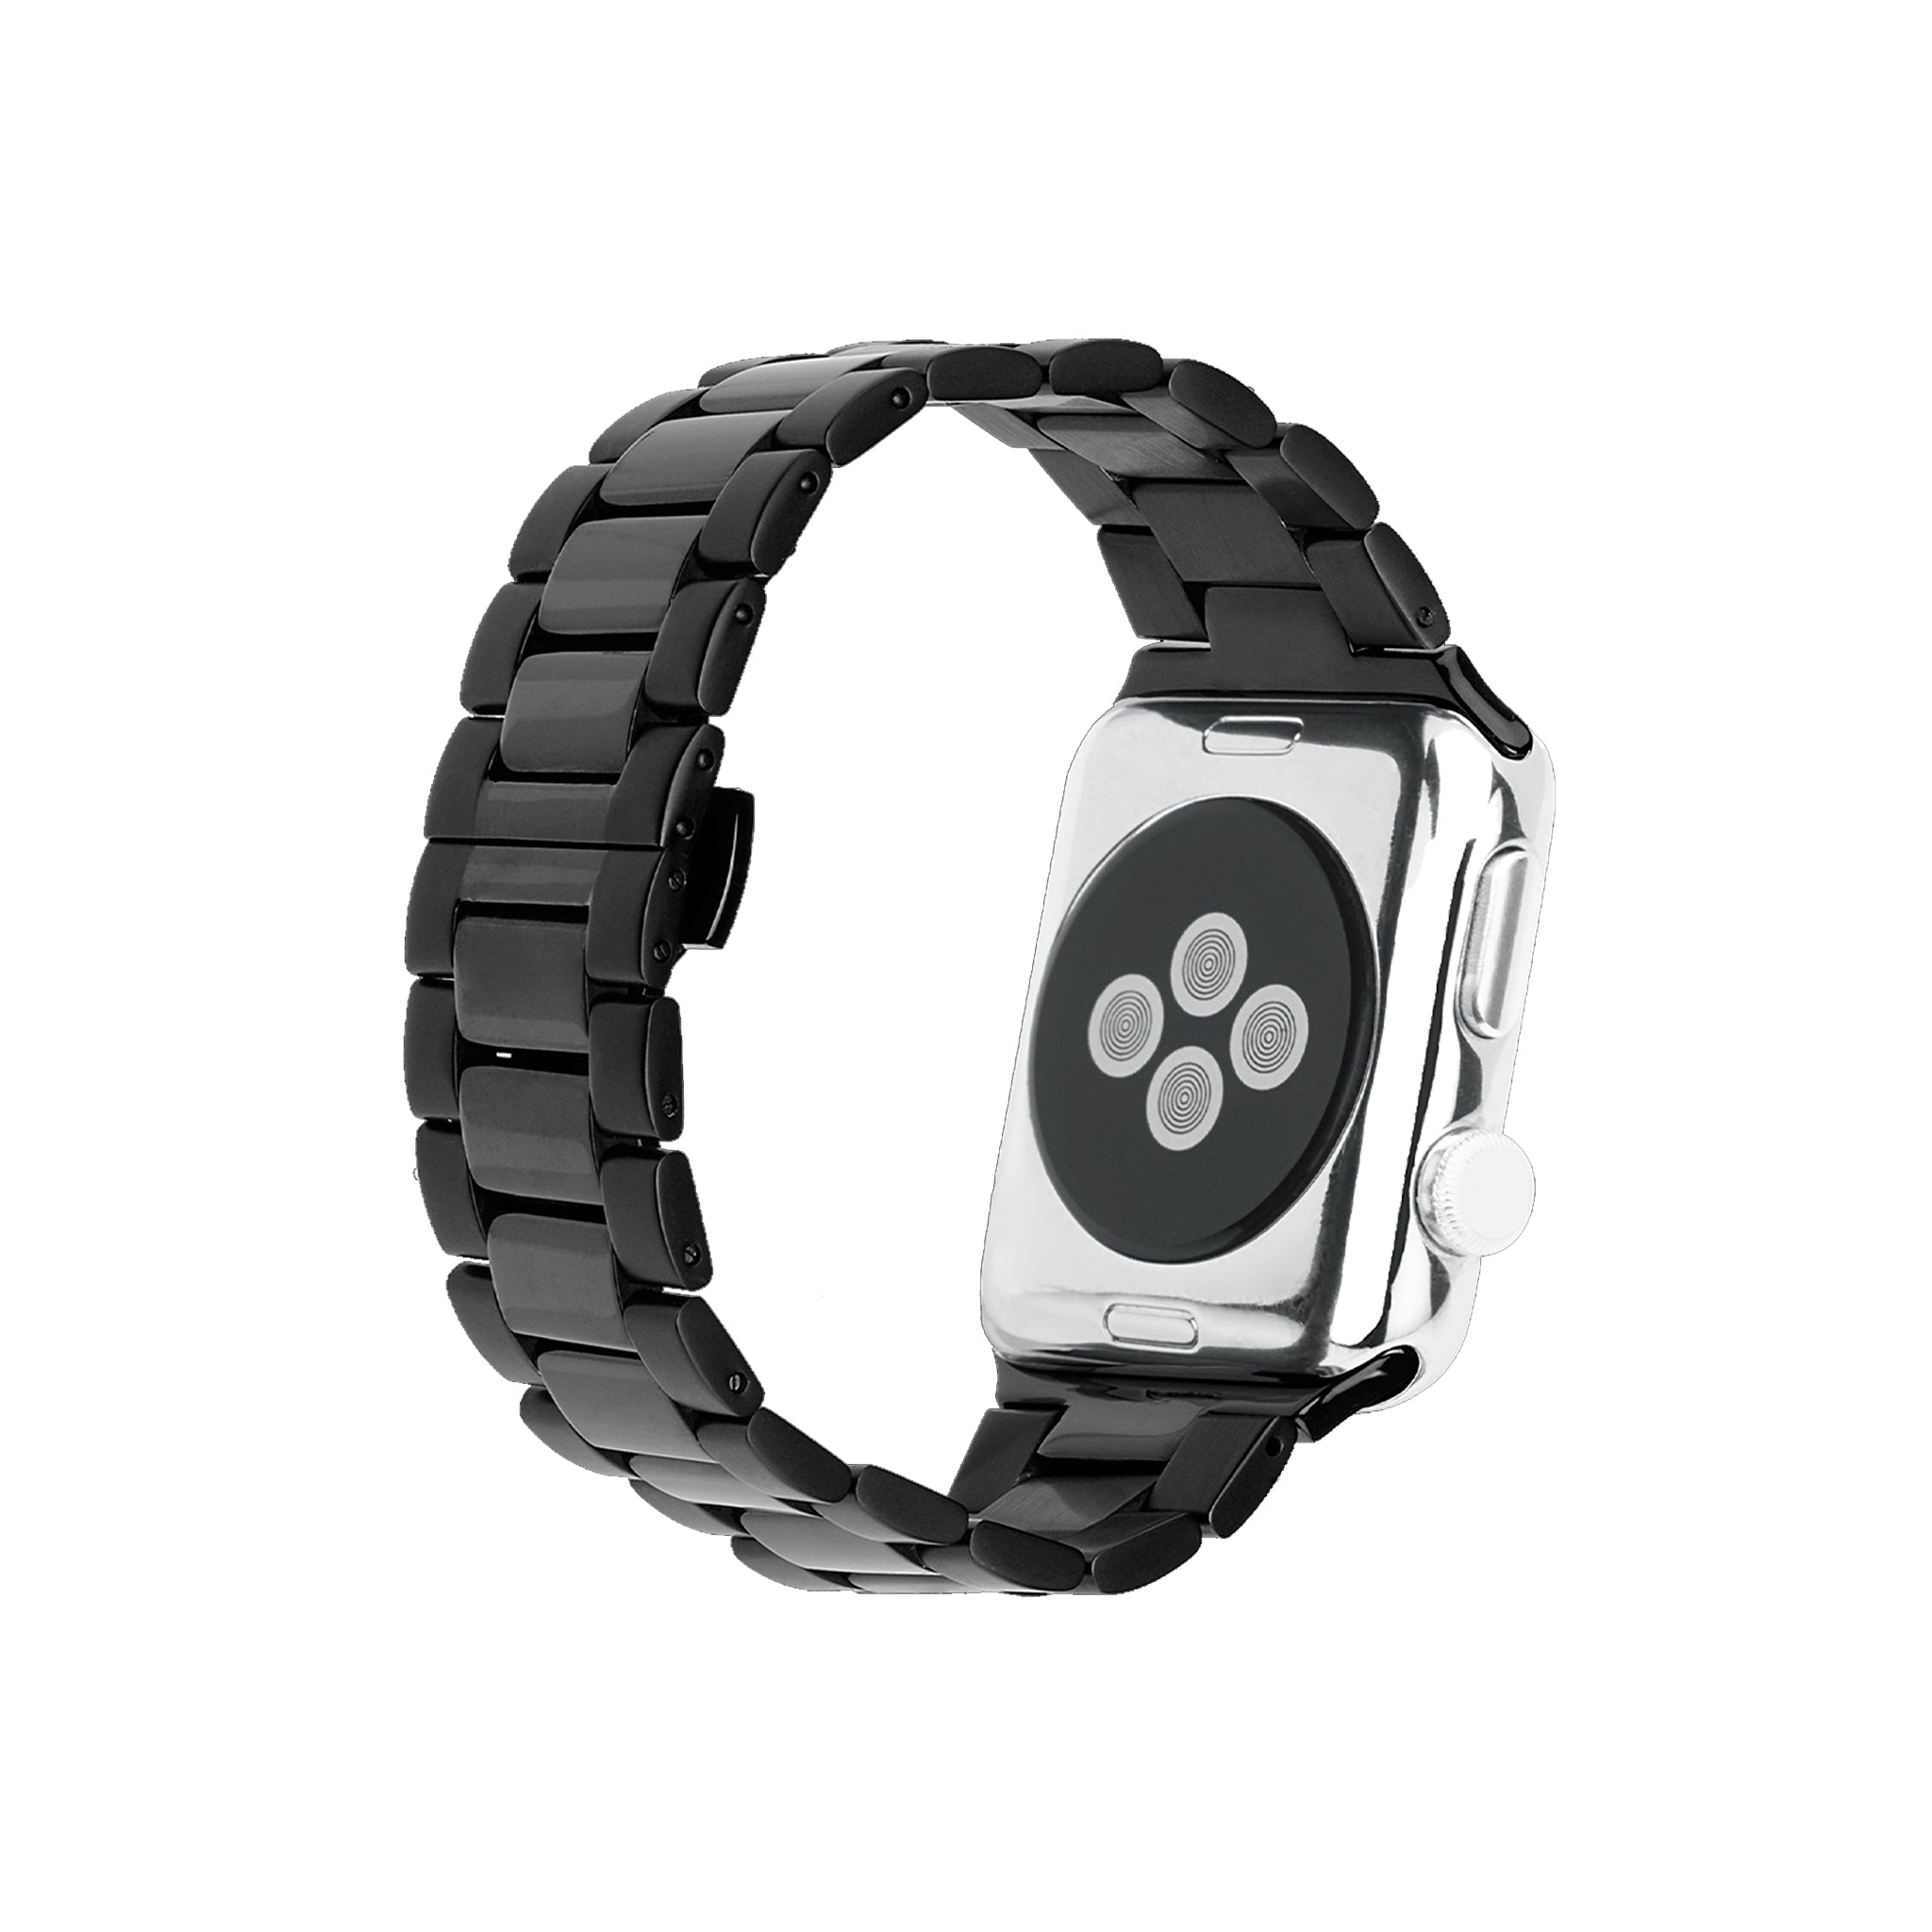 Case-mate - Linked Watchband For Apple Watch 42mm / 44mm - Black